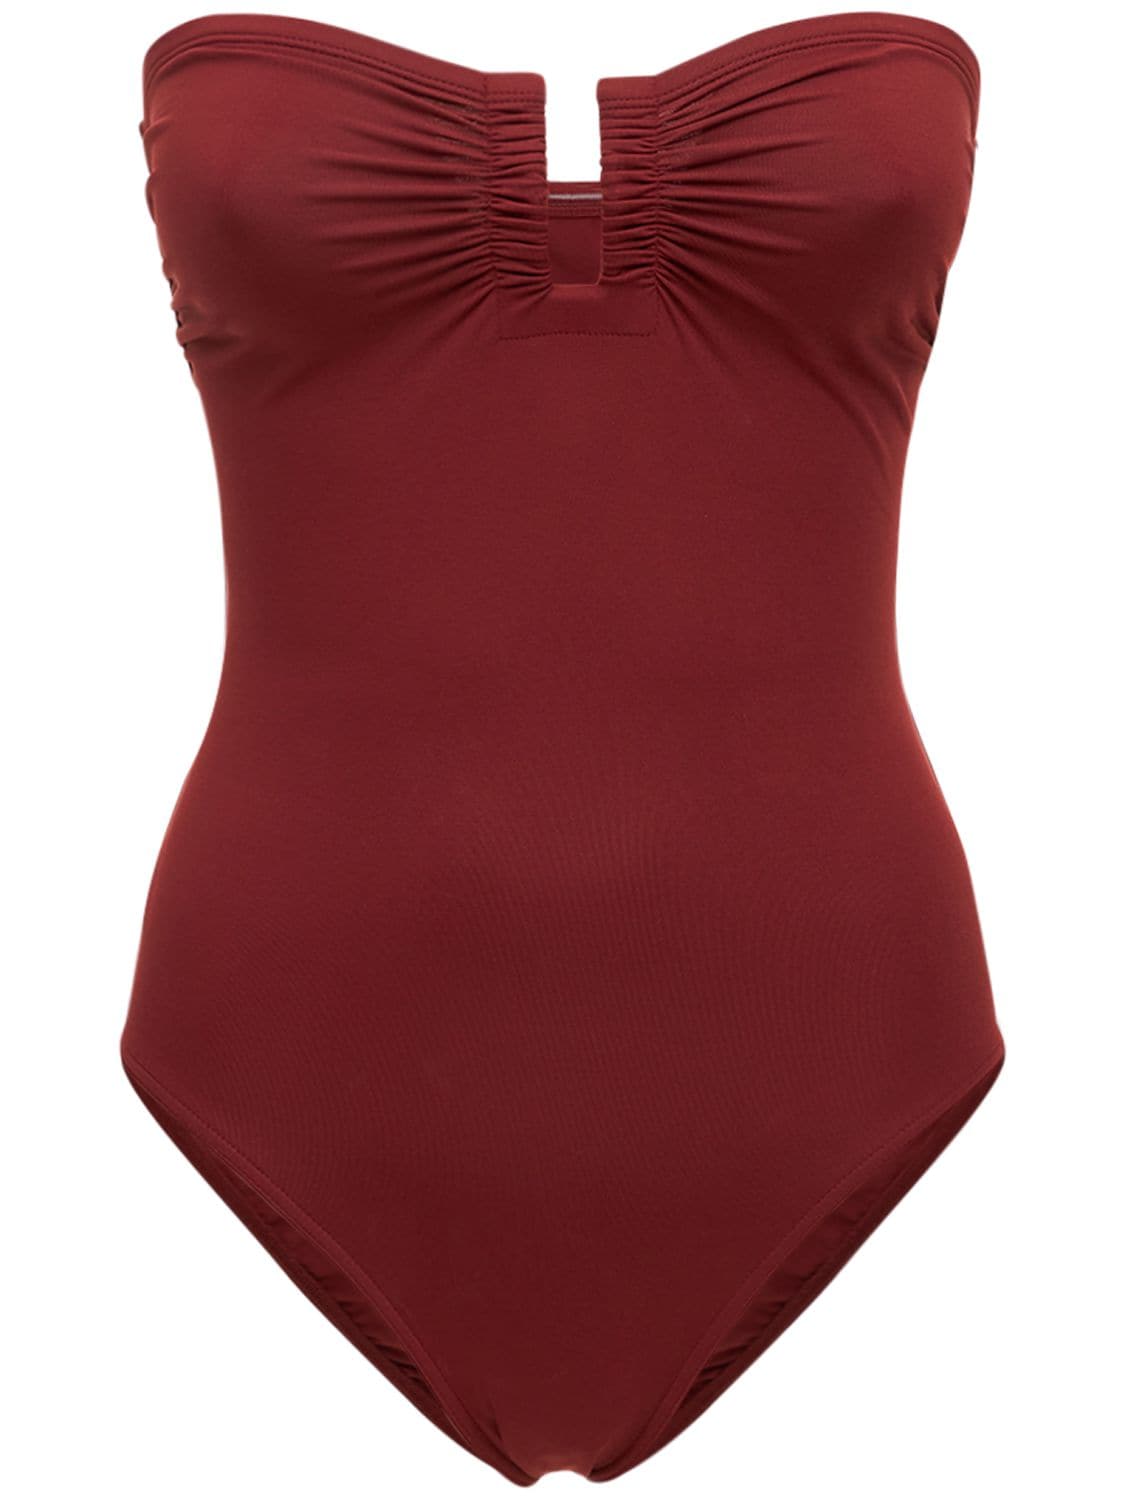 ERES CASSIOPEE ONE PIECE STRAPLESS SWIMSUIT,74ICDU036-MDEWNTK1